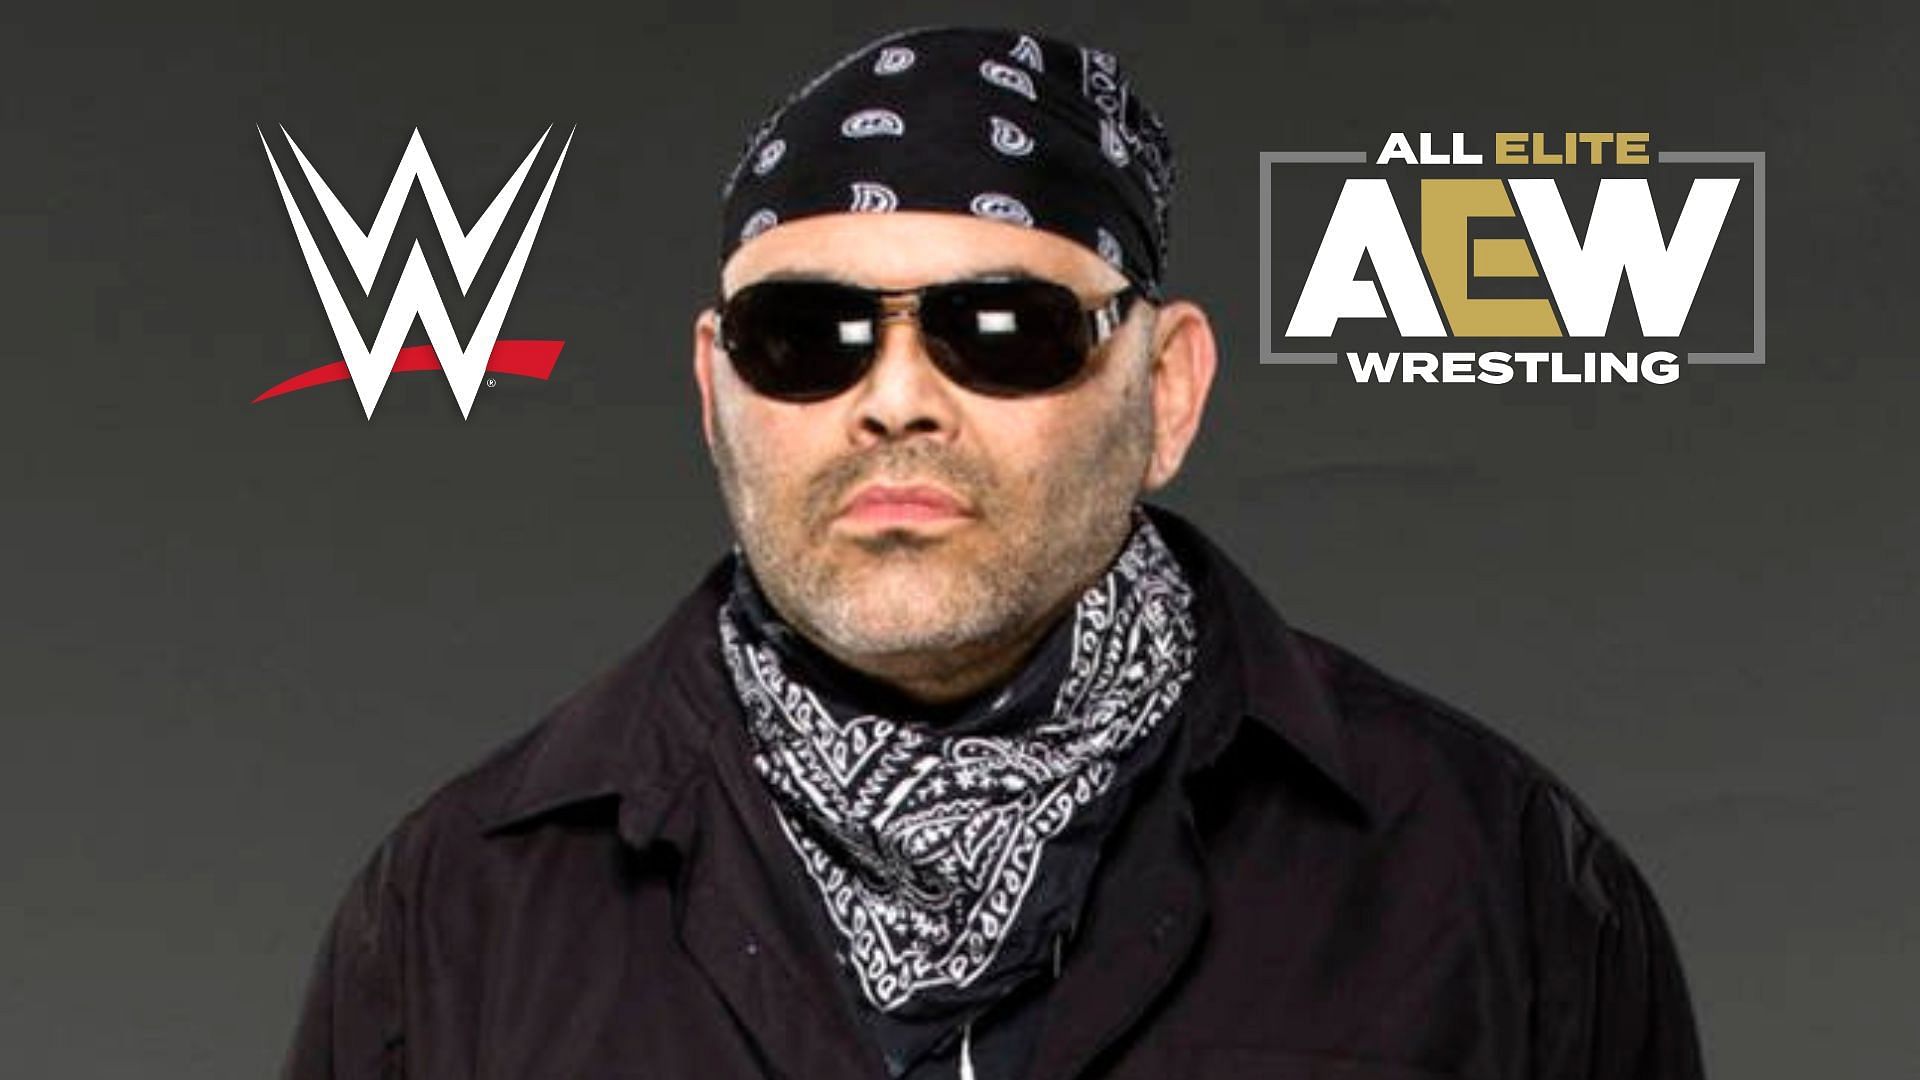 Konnan has weighed in with his thoughts about a former AEW star